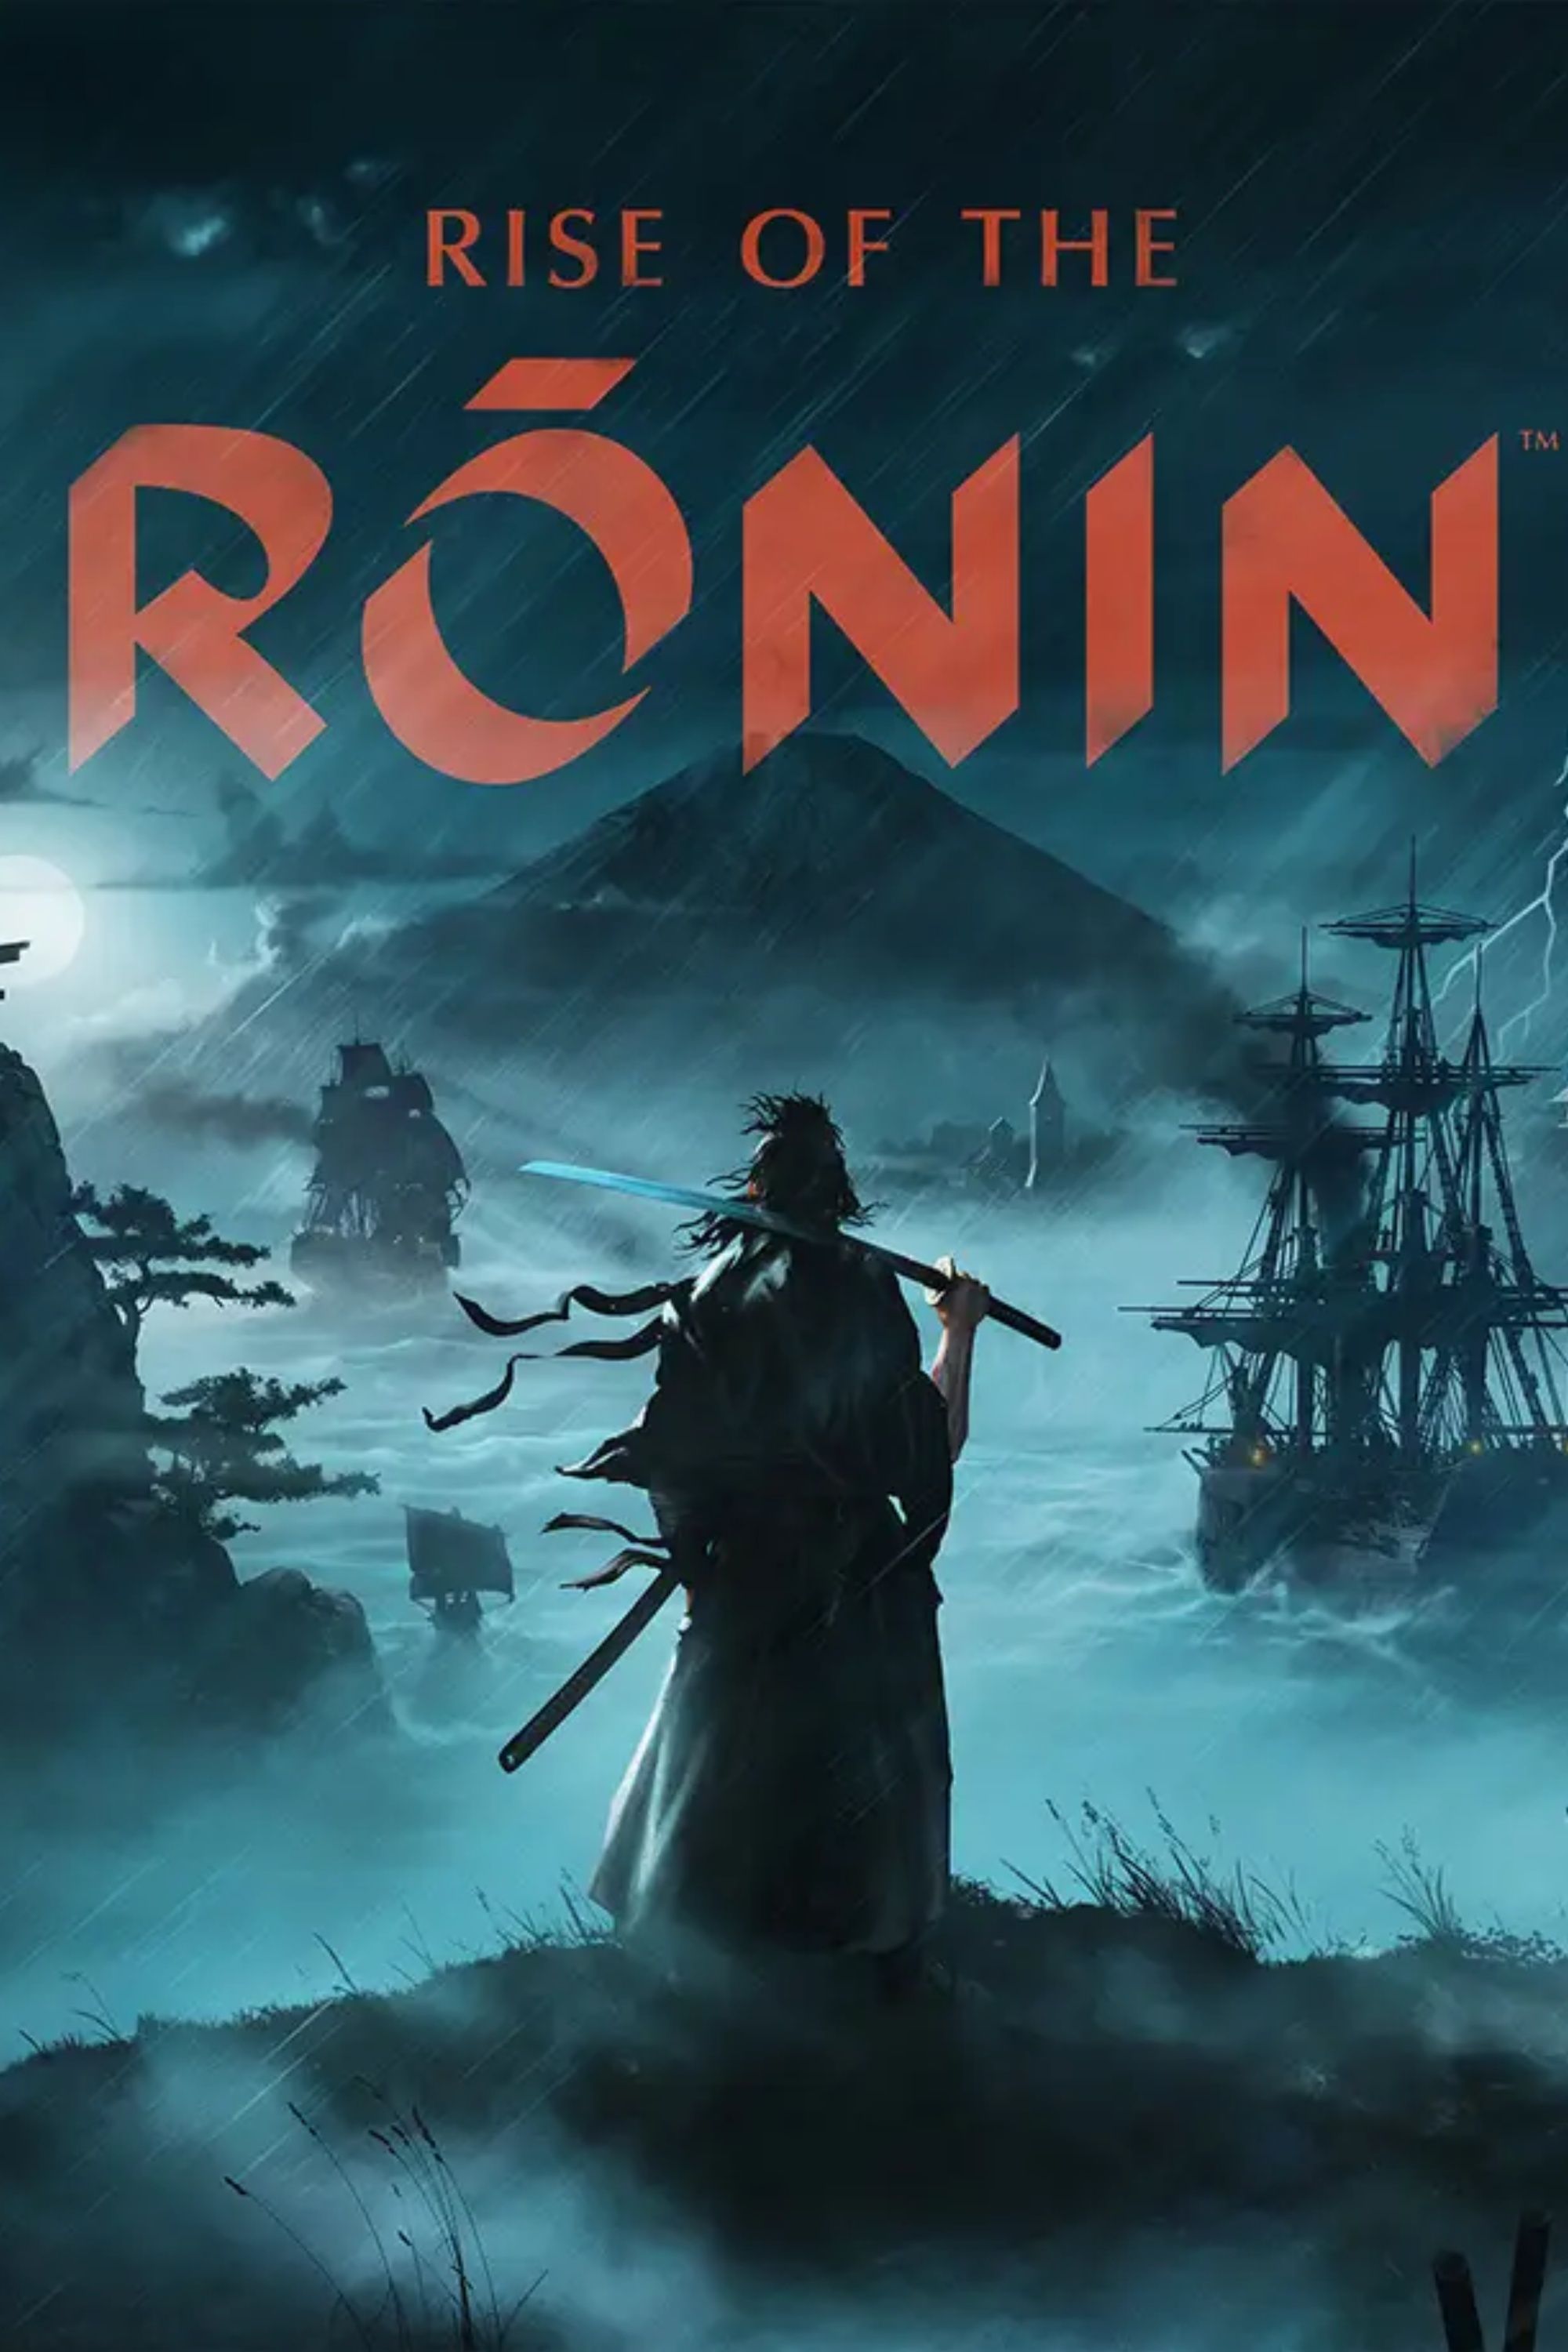 rise of the ronin character holding a sword in the rain under the game's title